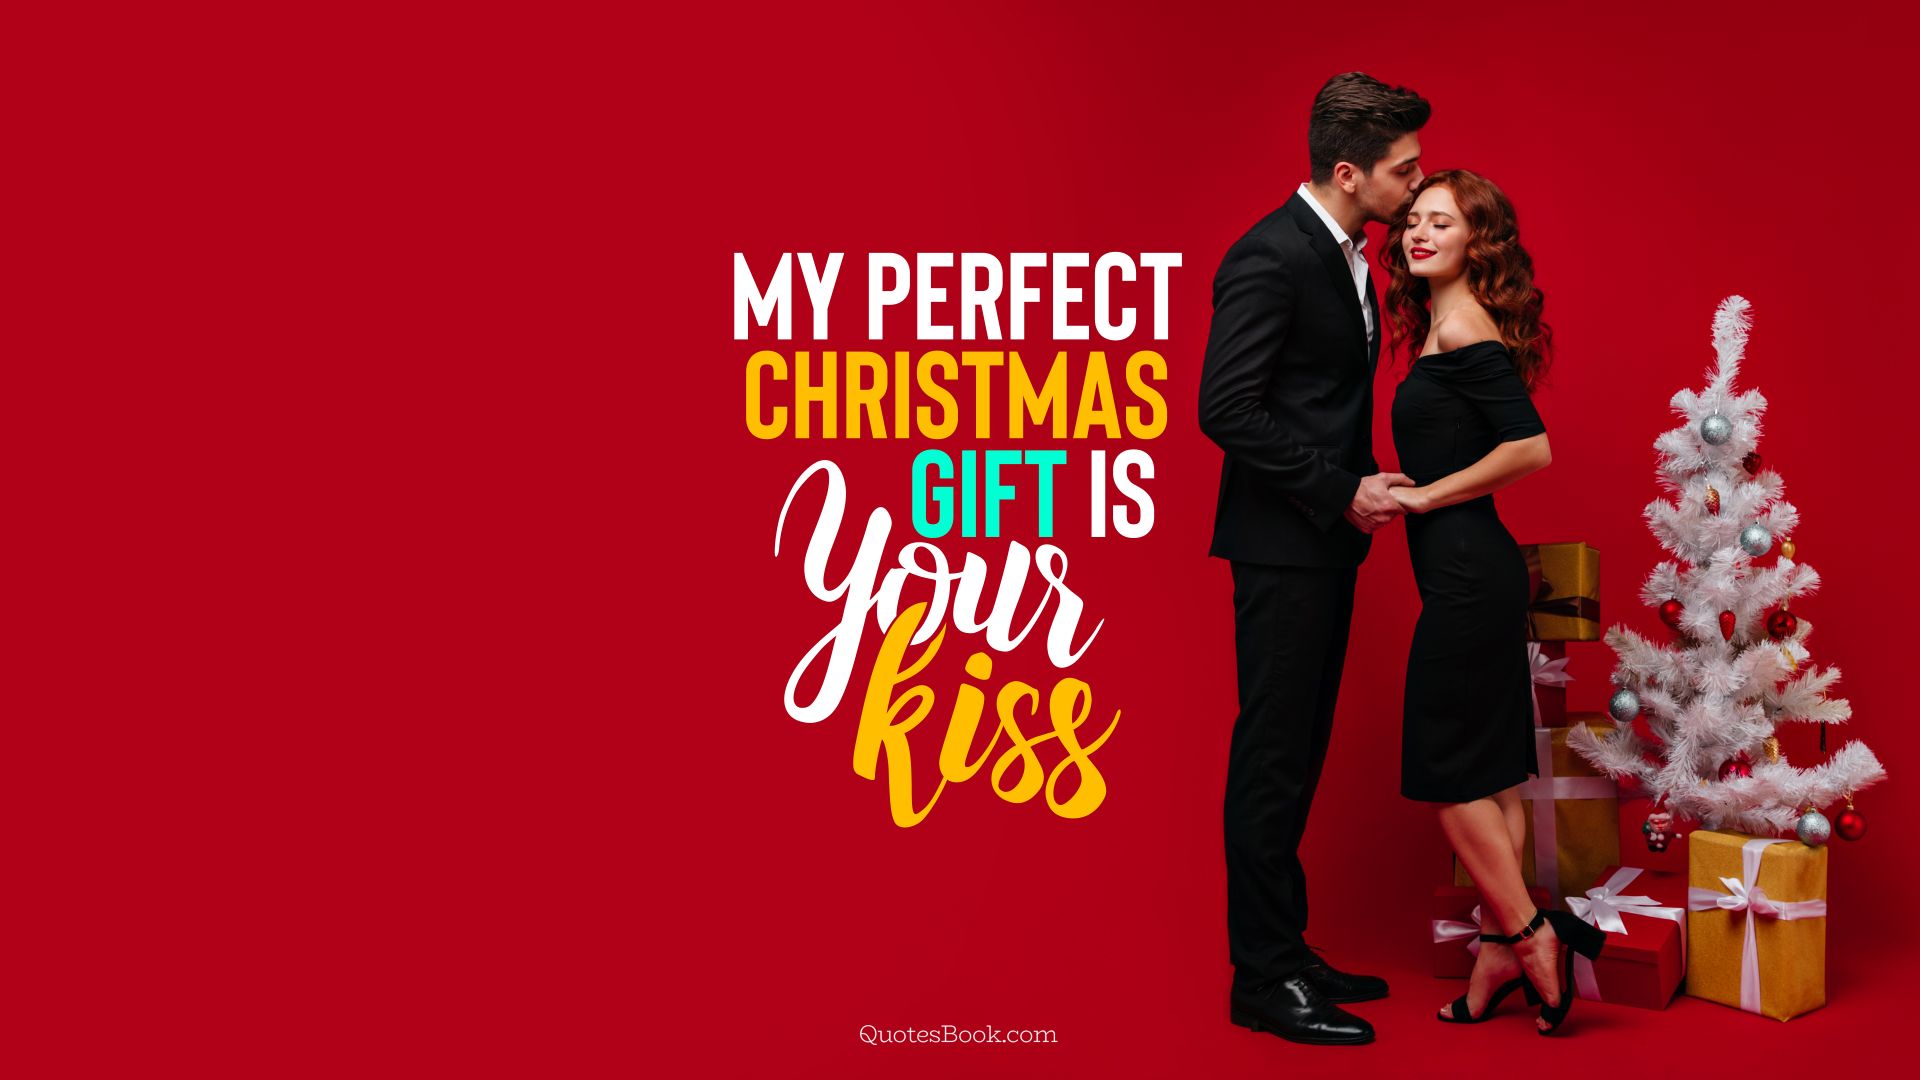 My perfect Christmas gift is your kiss. - Quote by QuotesBook